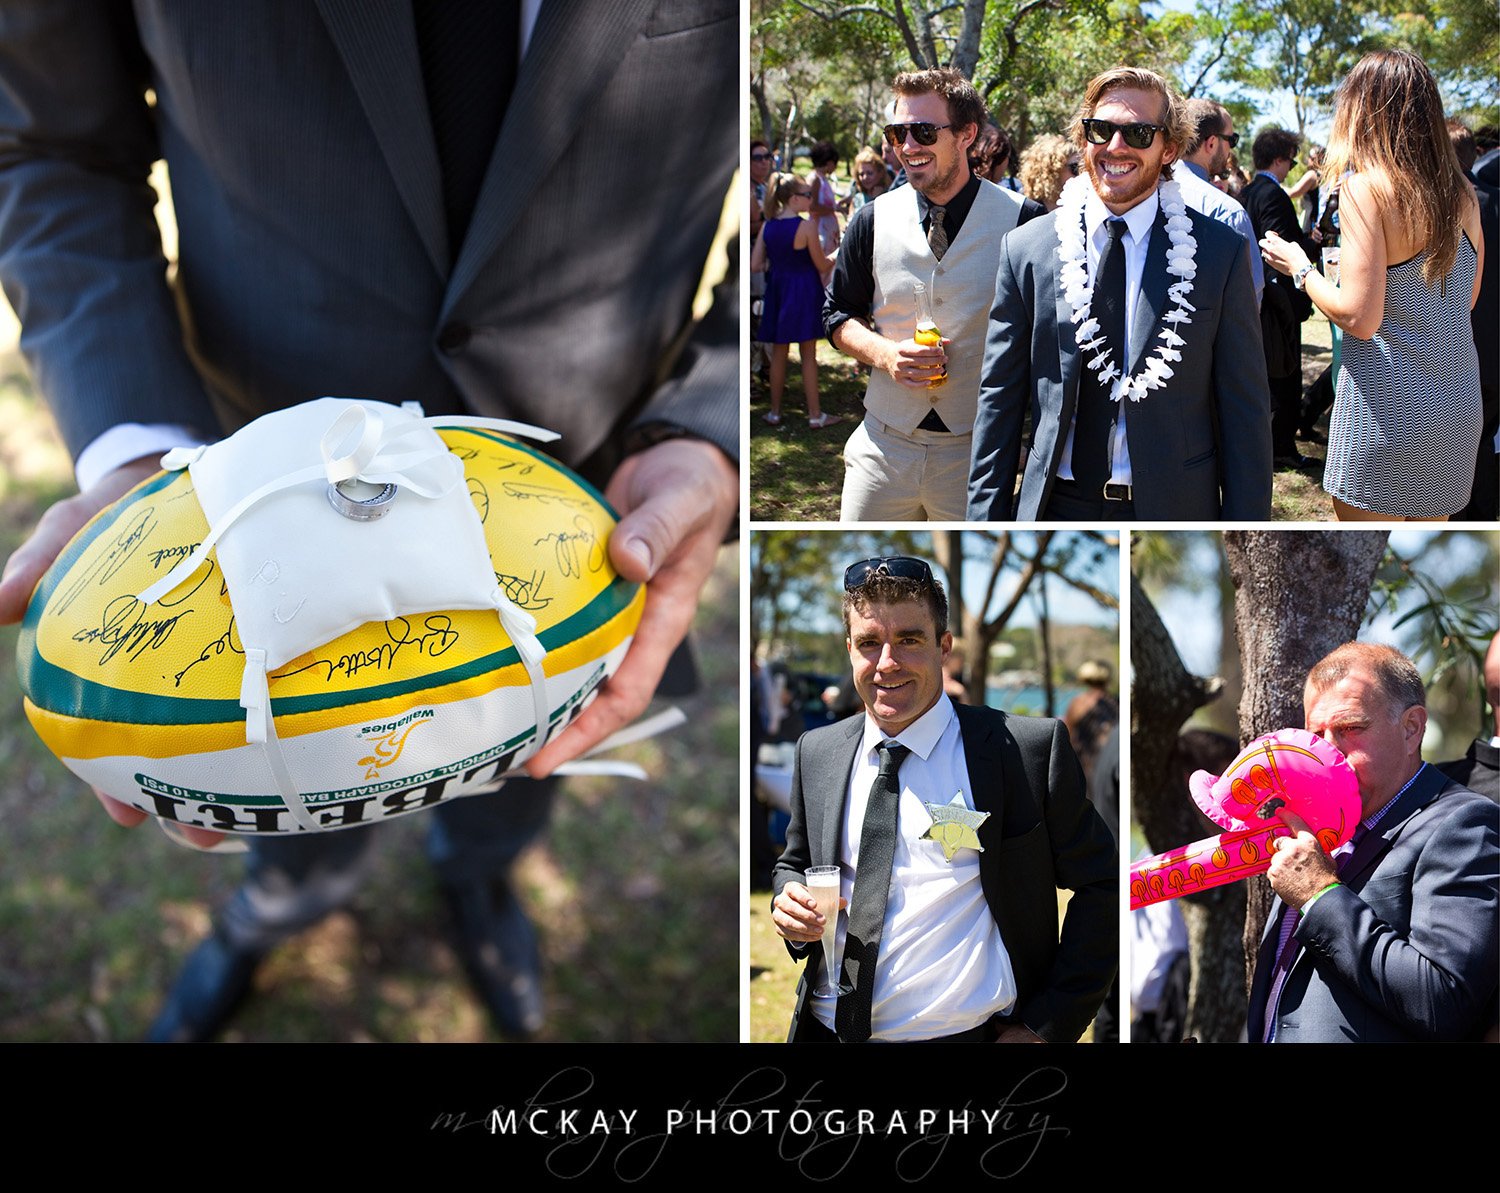 Love the dress ups and props Jess Peter - Clarkes Point Reserve wedding